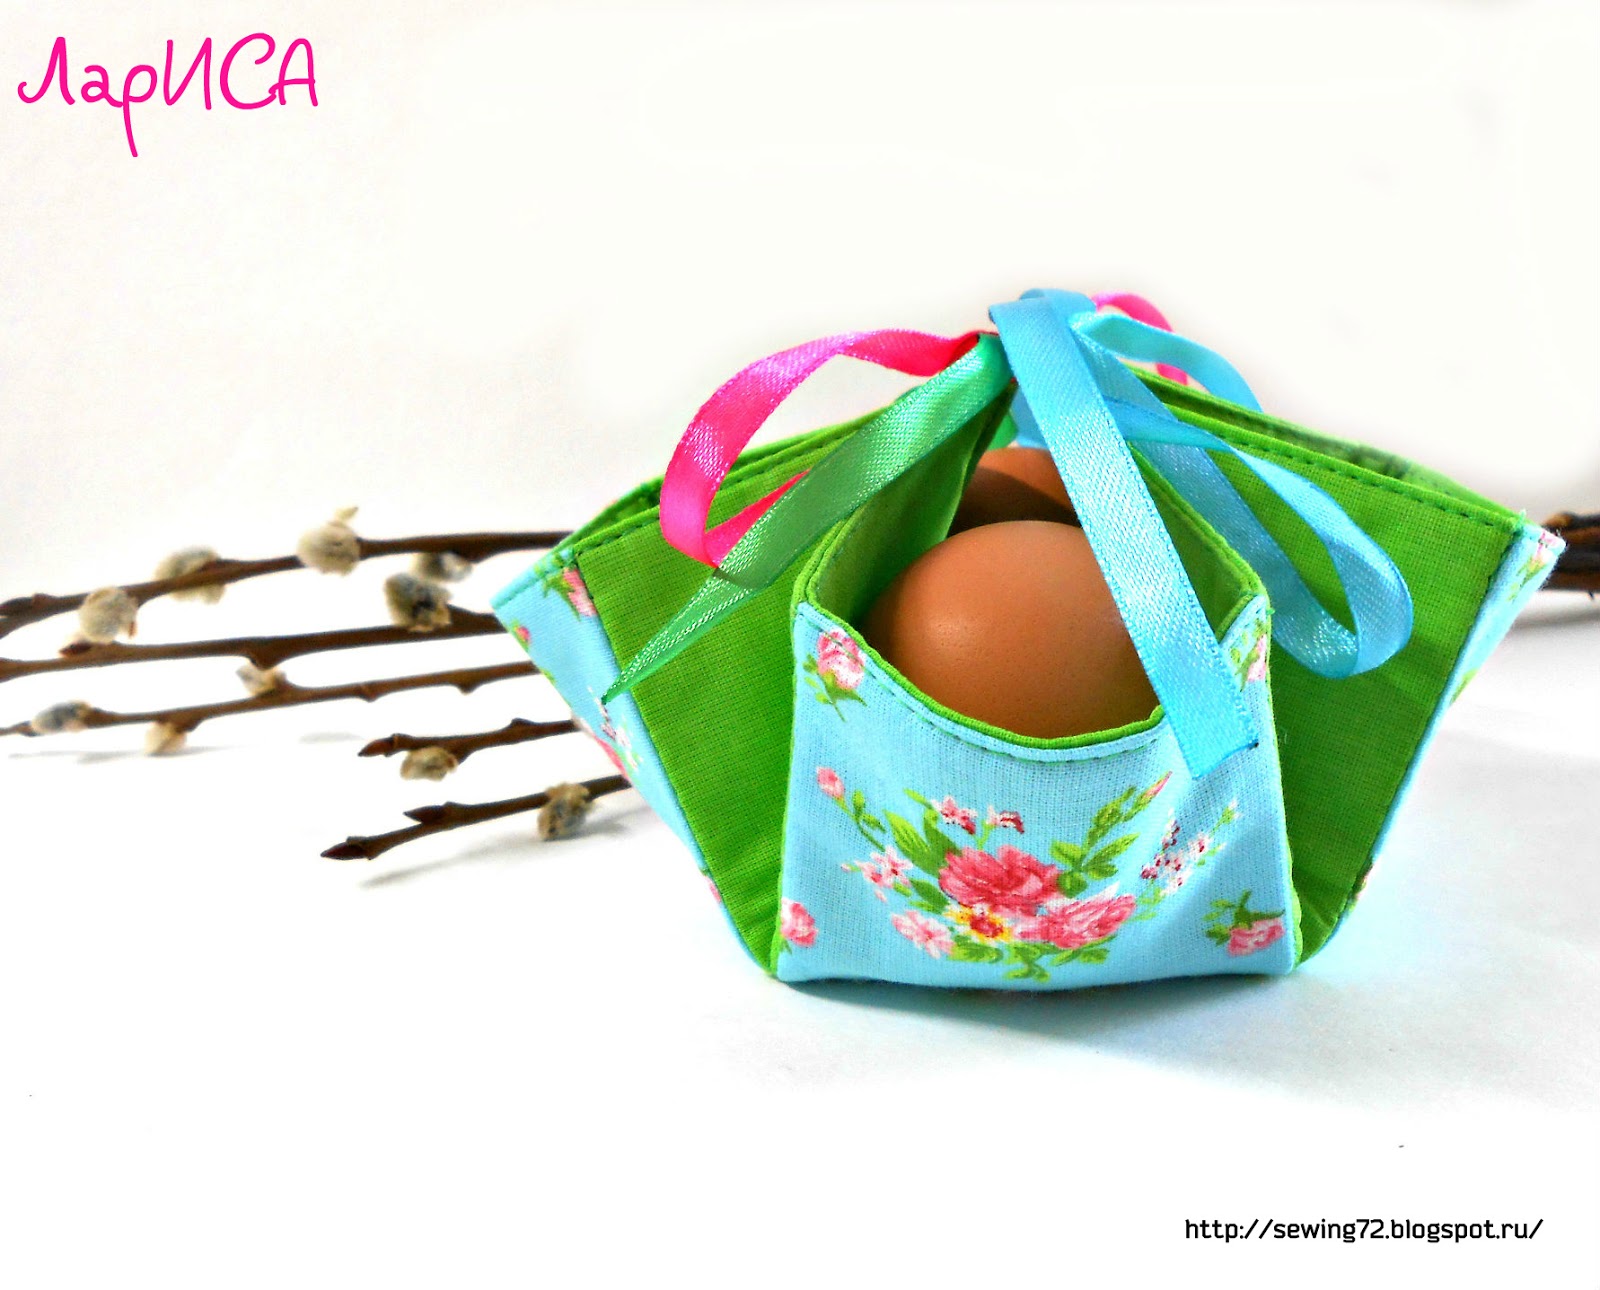 How to sew an unusual gift-basket bag of fabric. Tutorial.